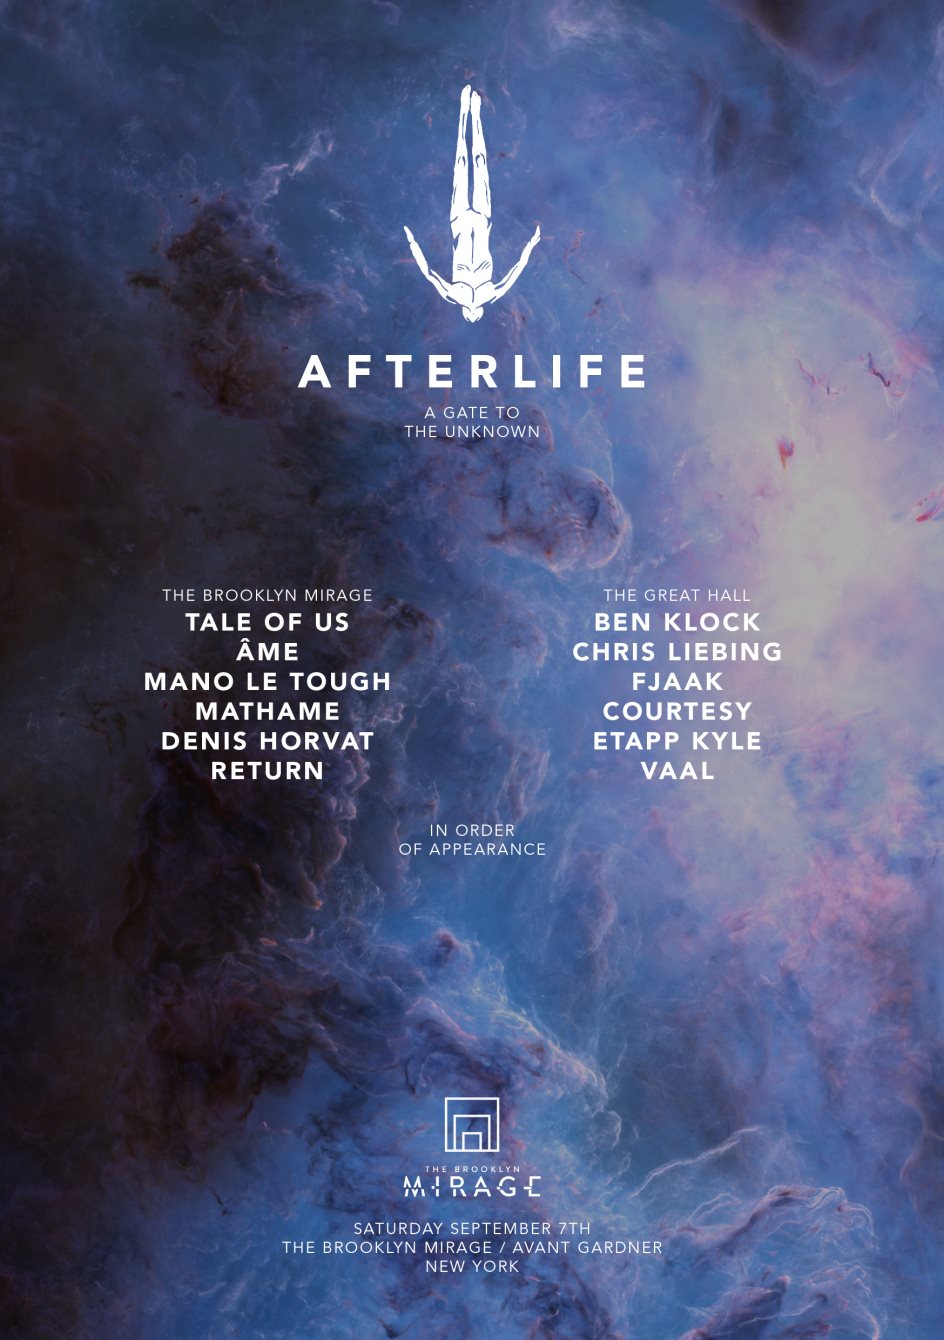 Afterlife and Tale Of Us Events: Living in the Now or Distracted